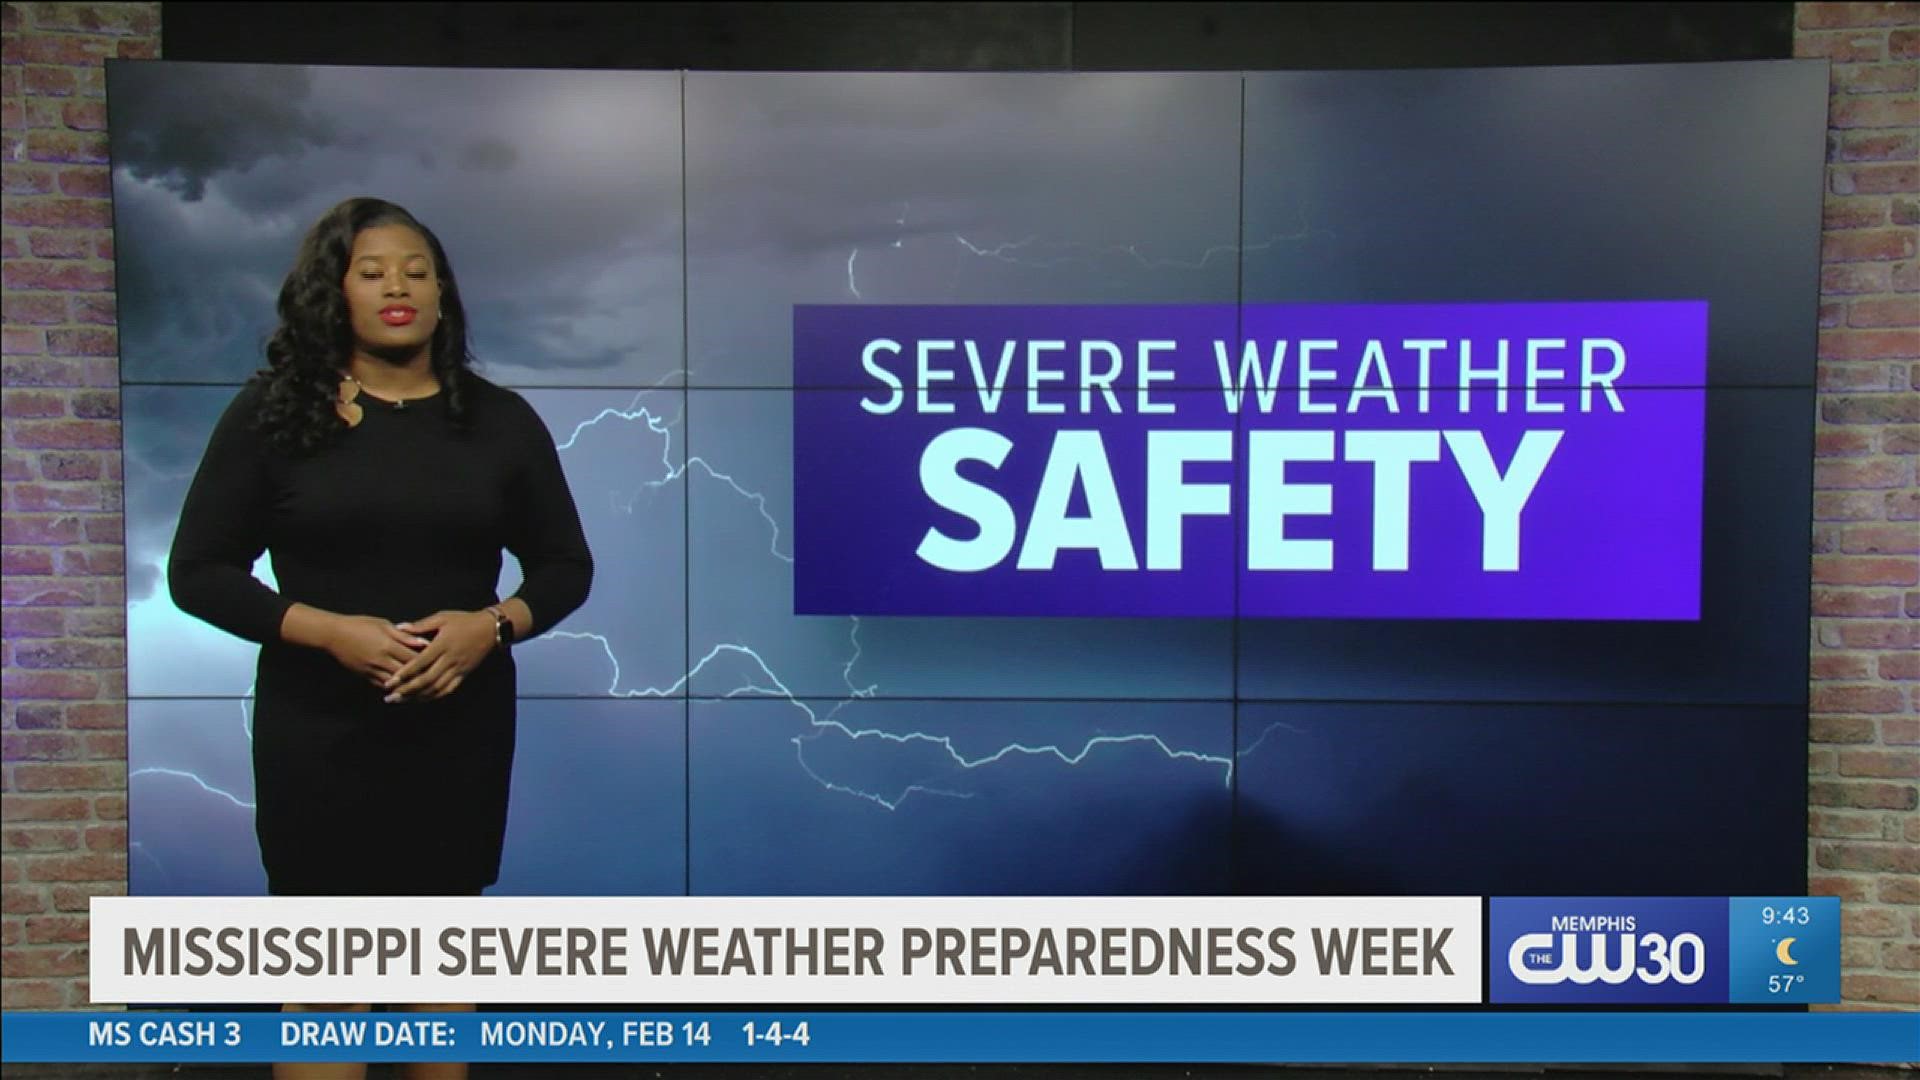 Mississippi Severe Weather Preparedness Week is this week. Severe weather can happen any time. So, the state is making sure residents are ready.